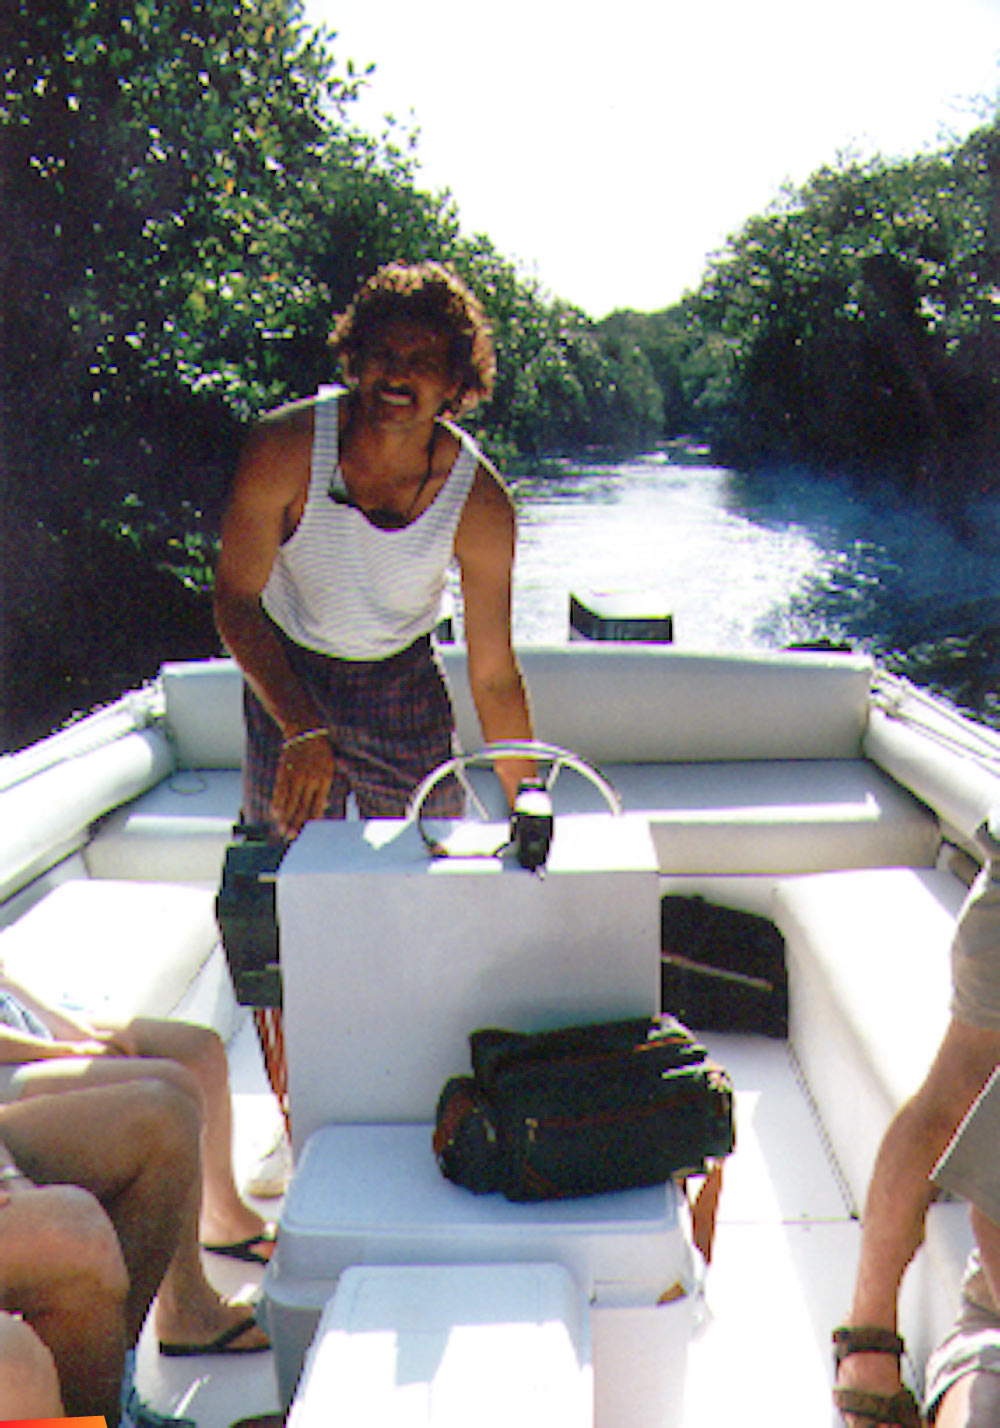 Daniel Nunez of Tanisha Tours driving the boat through the mangroves on the way back from Lamanai, 1997